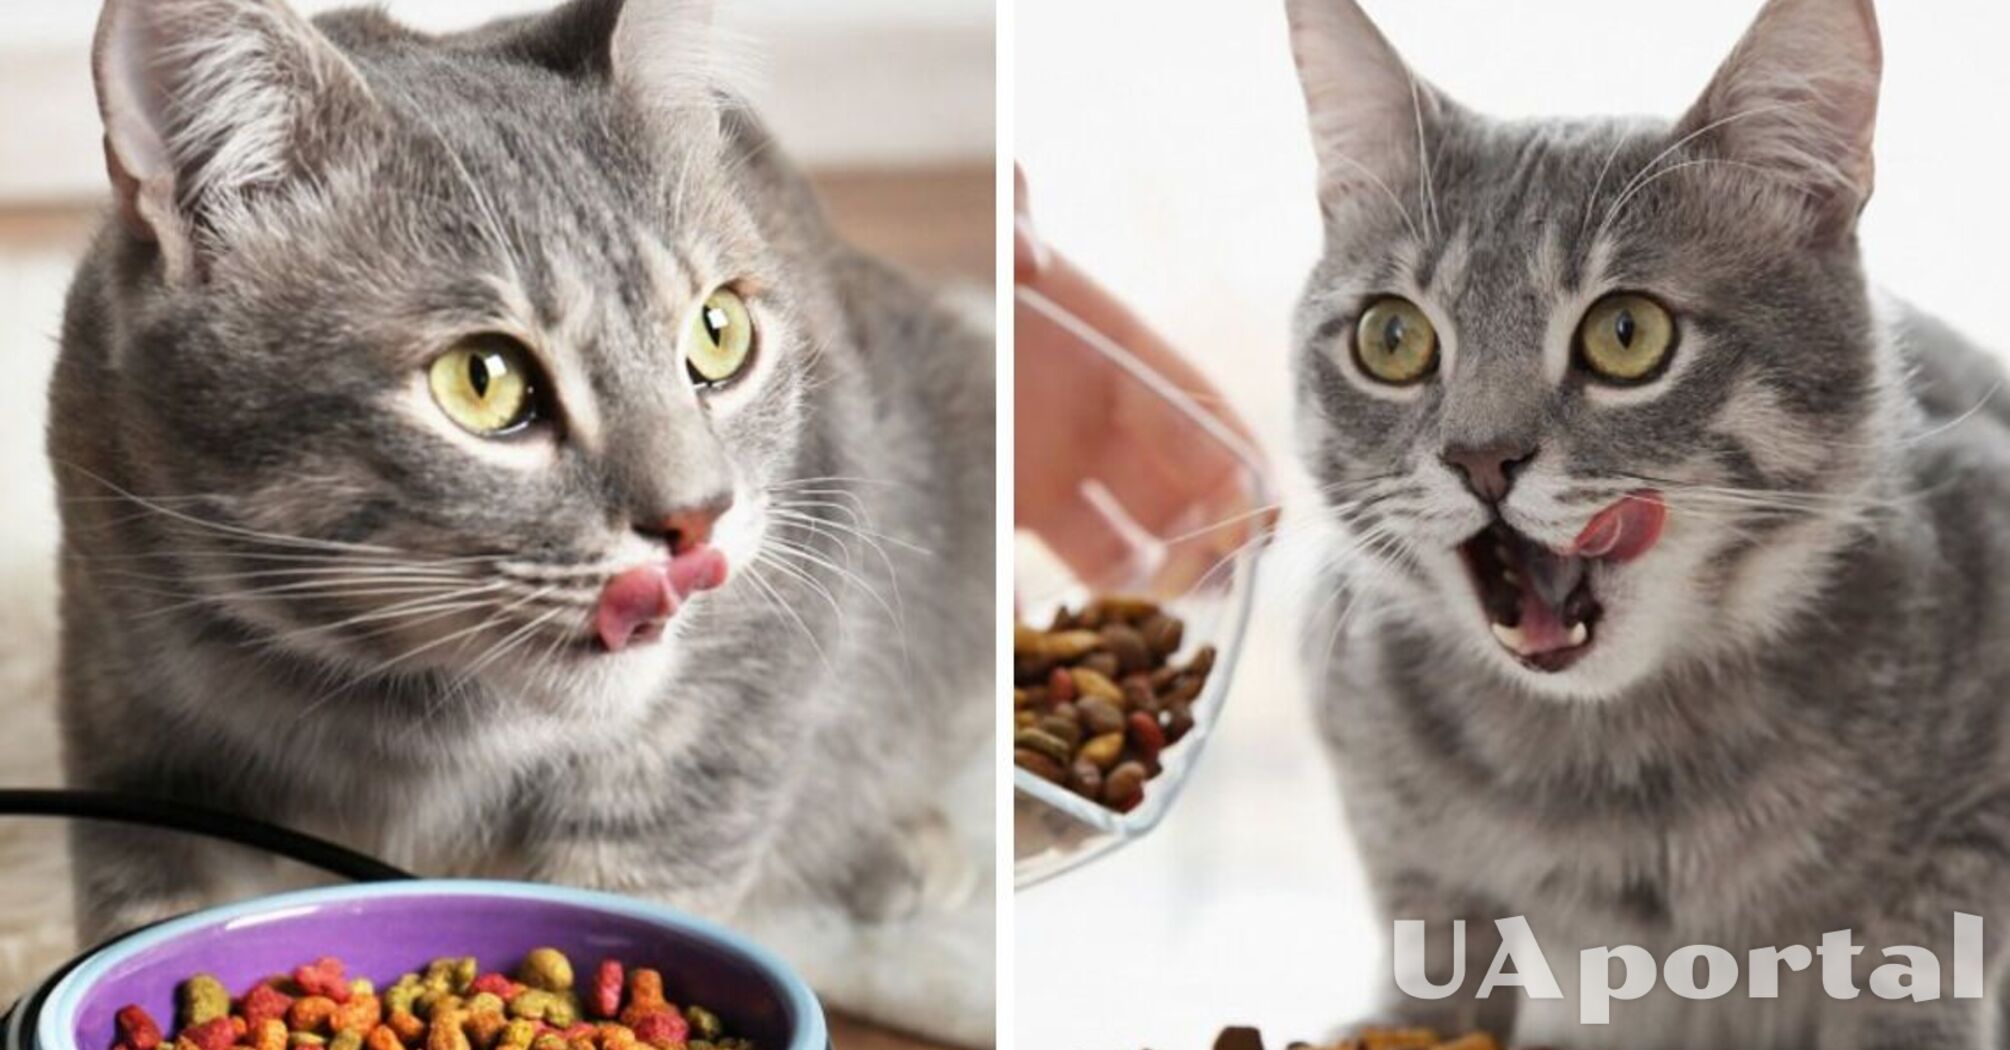 How to properly feed cats and cats with dry and wet food